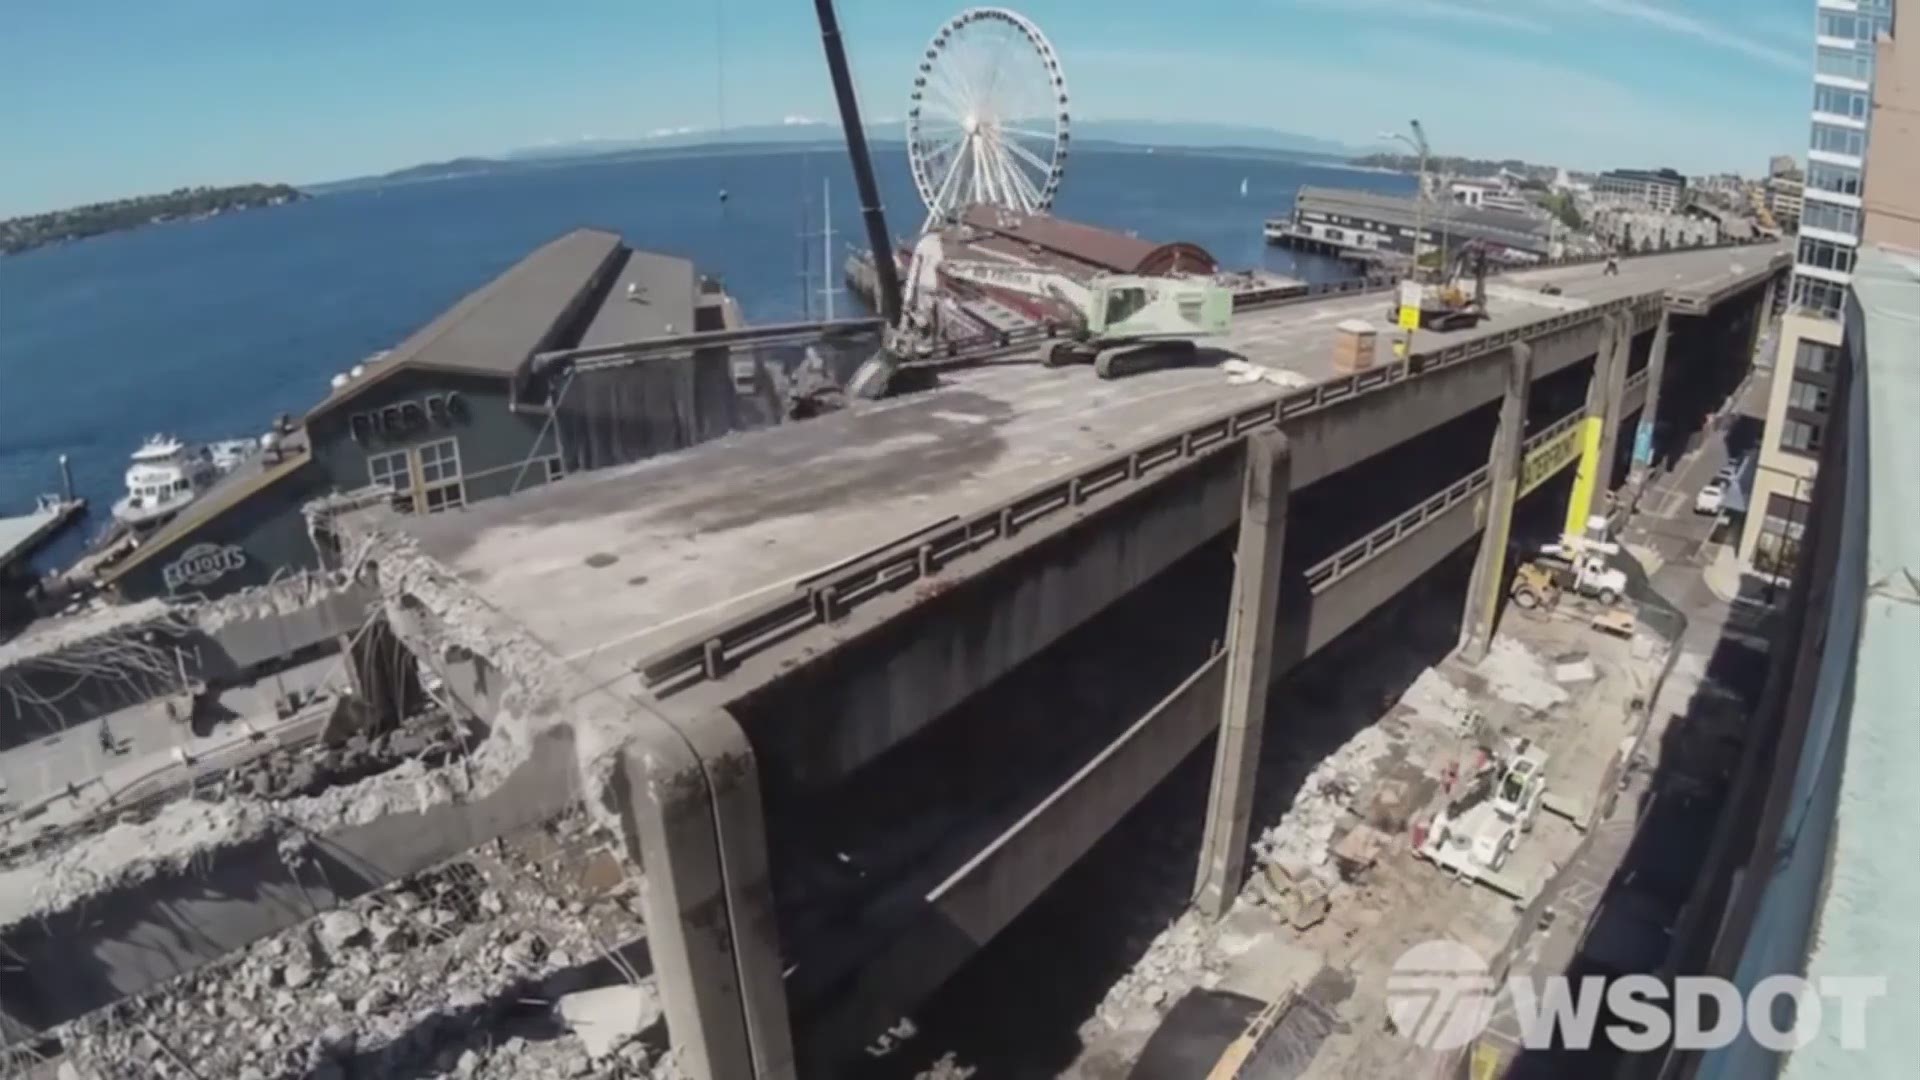 Timelapse video from WSDOT shows crews demolishing two spans of Seattle’s Alaskan Way Viaduct over several days in May 2019.